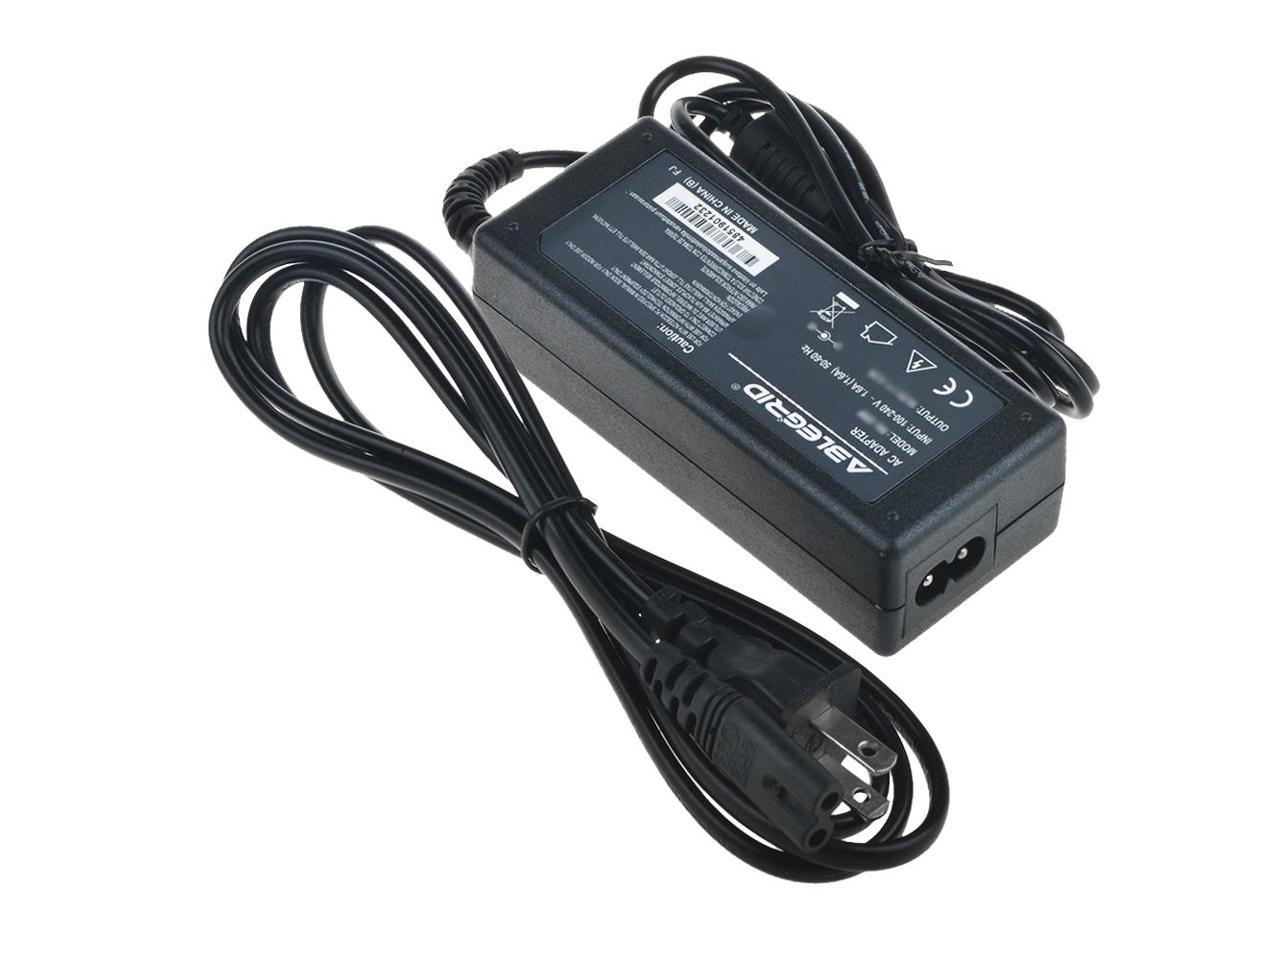 charger AC adapter for 0296 National Products Kid Motorz Lil Patrol motorcycle 